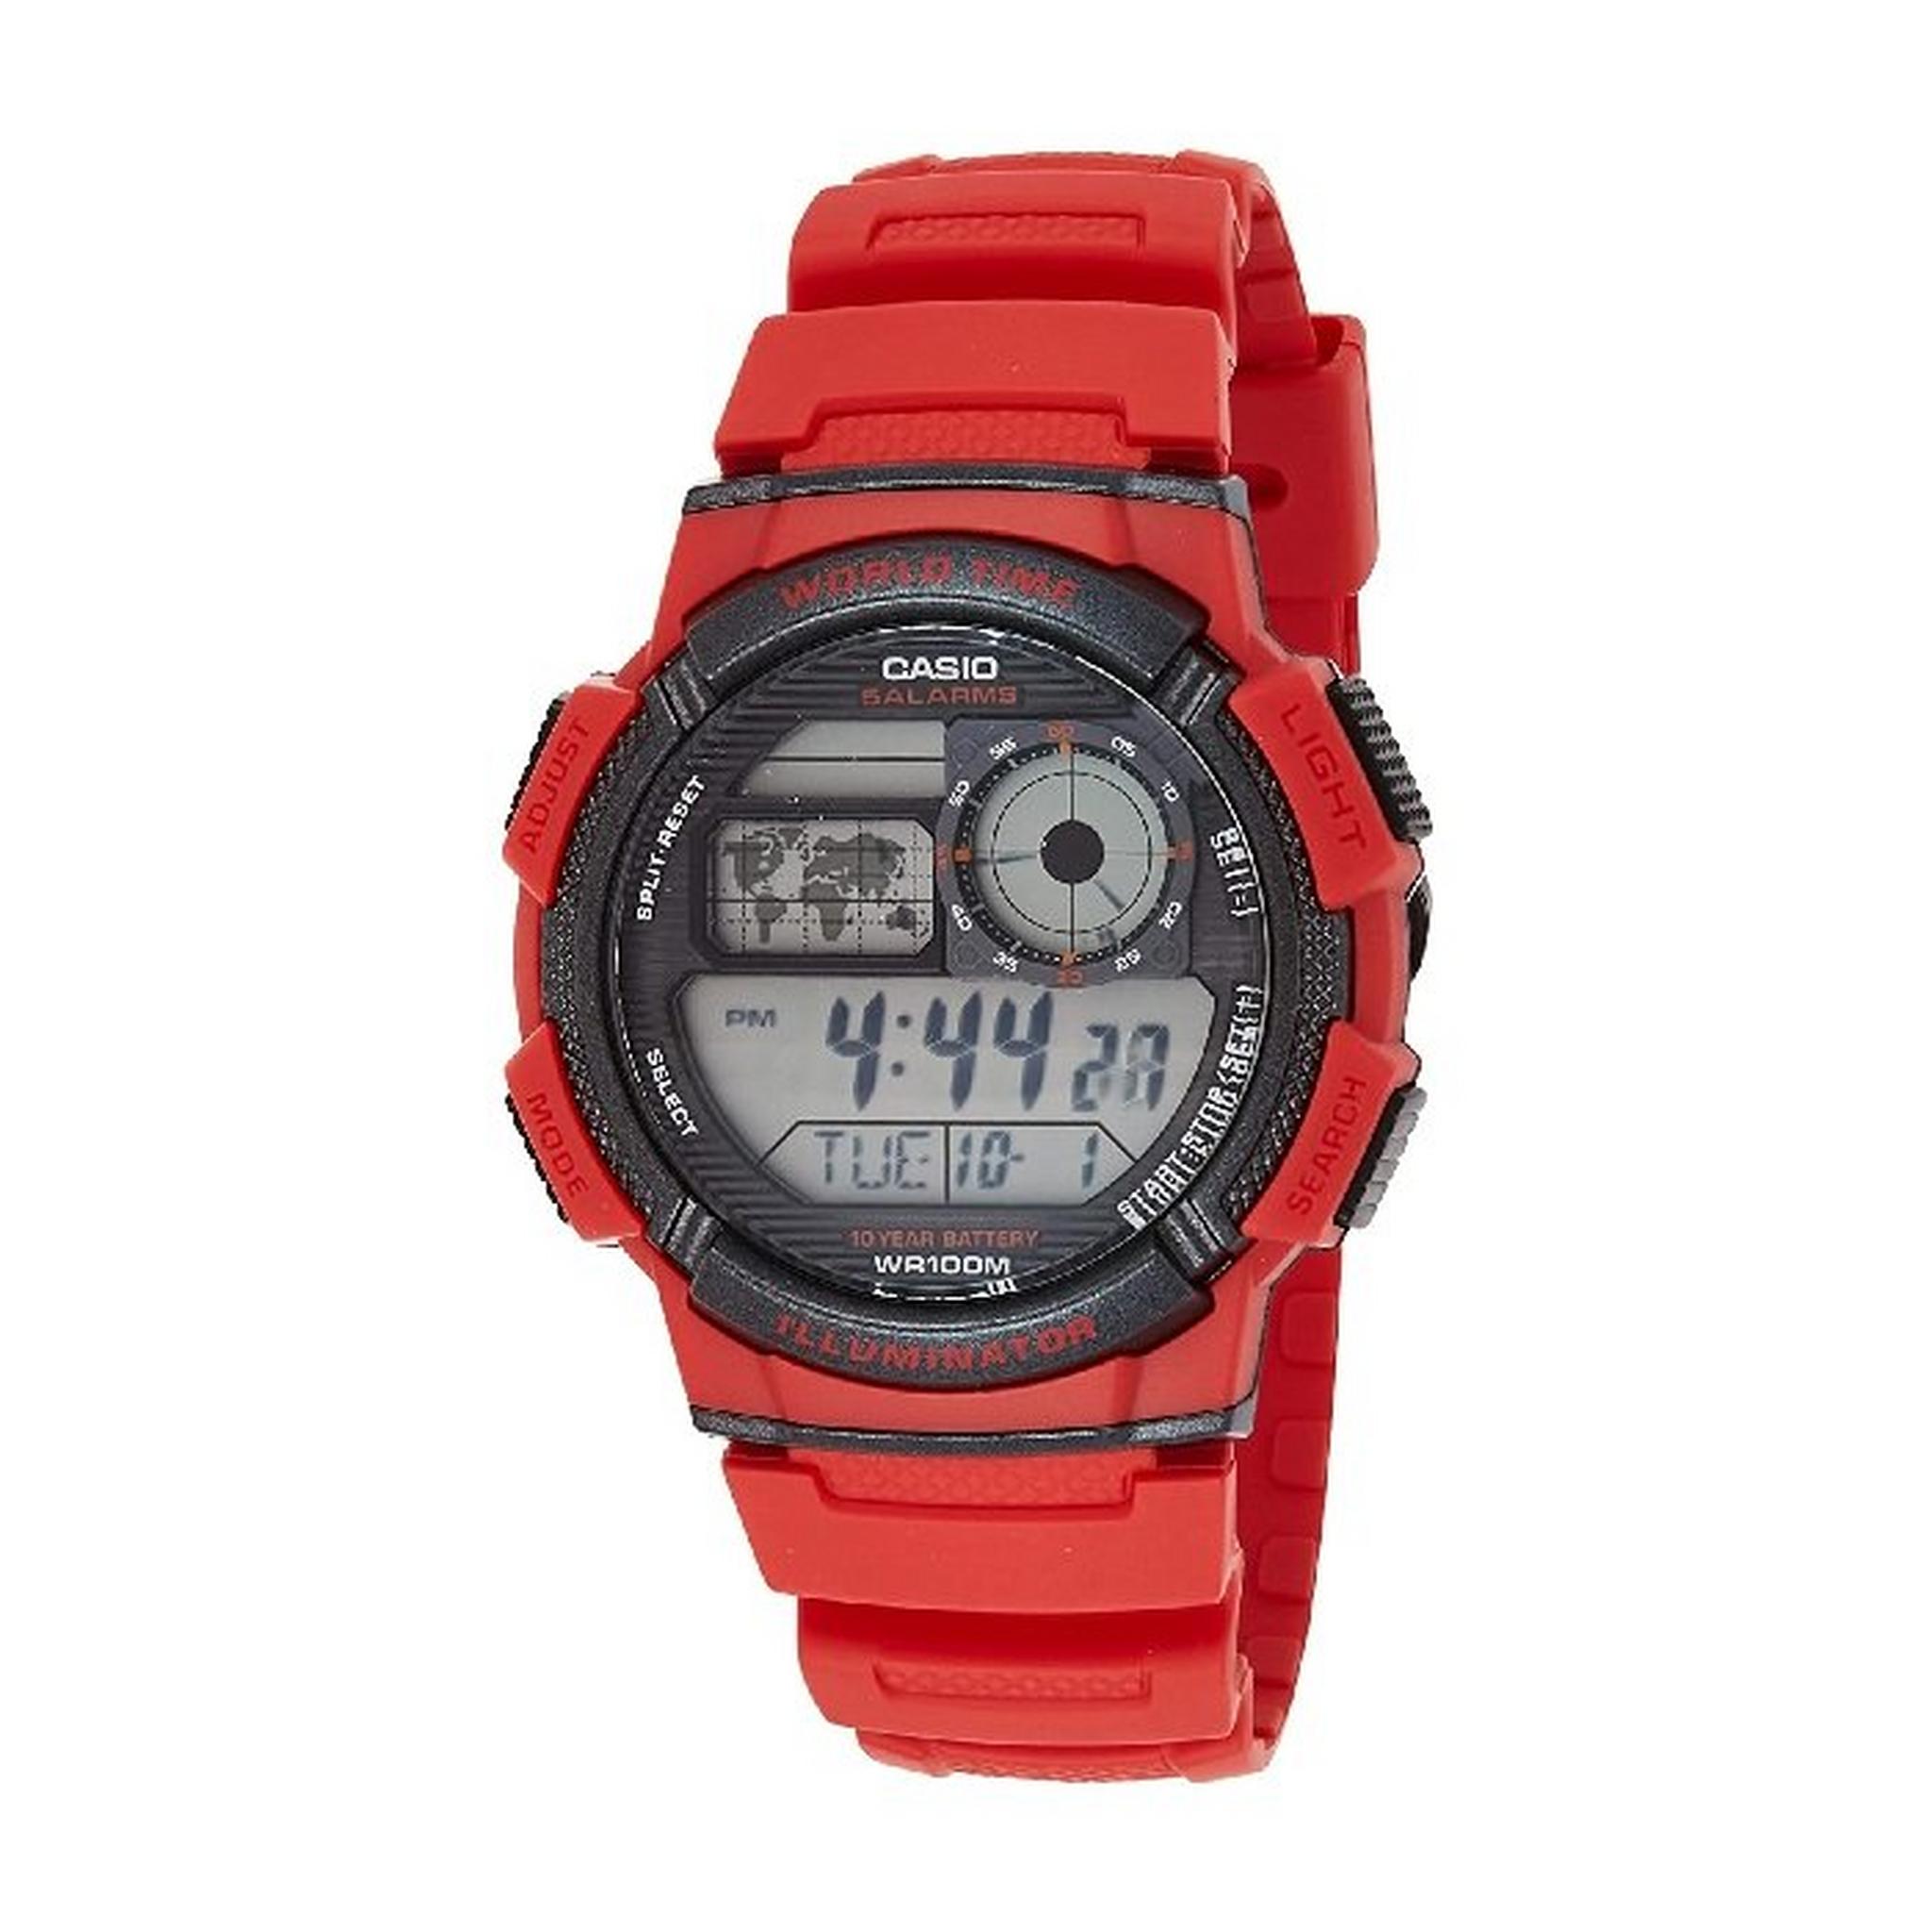 Casio Digital Gents Watch 44mm GRO with Resin Strap (AE-1000W-4BVDF) - Red